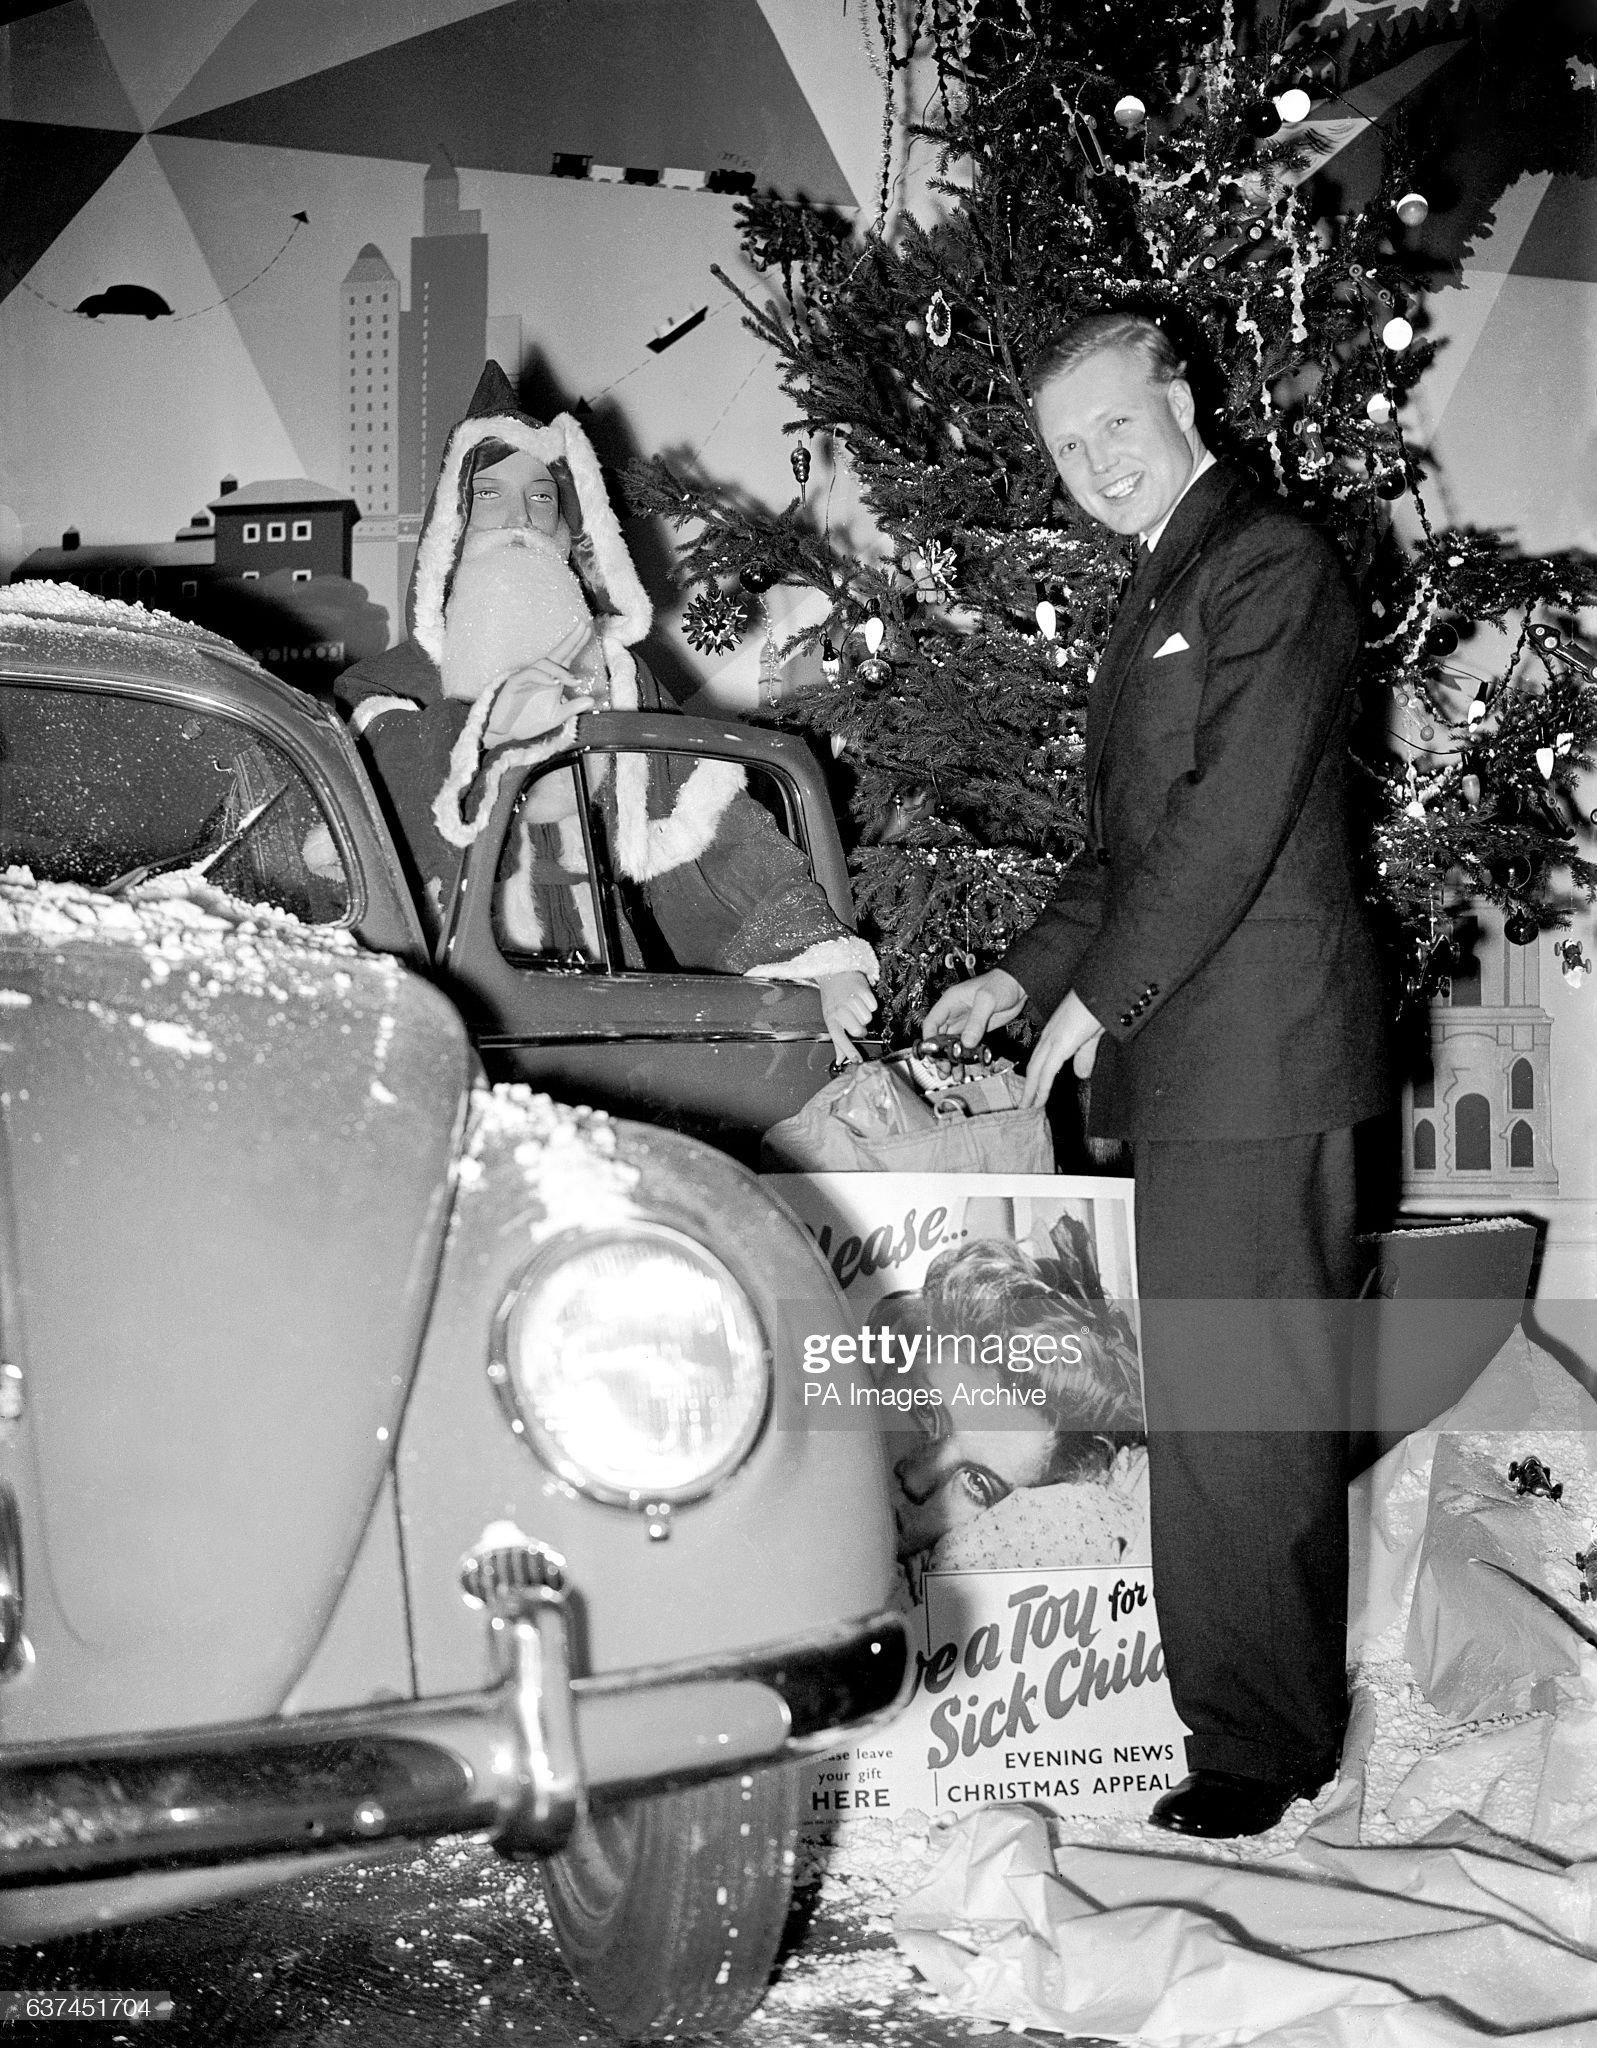 Mike Hawthorn opens the appeal, with a bit of help from a familiar character in a Volkswagen Beetle, on December 08, 1953. 